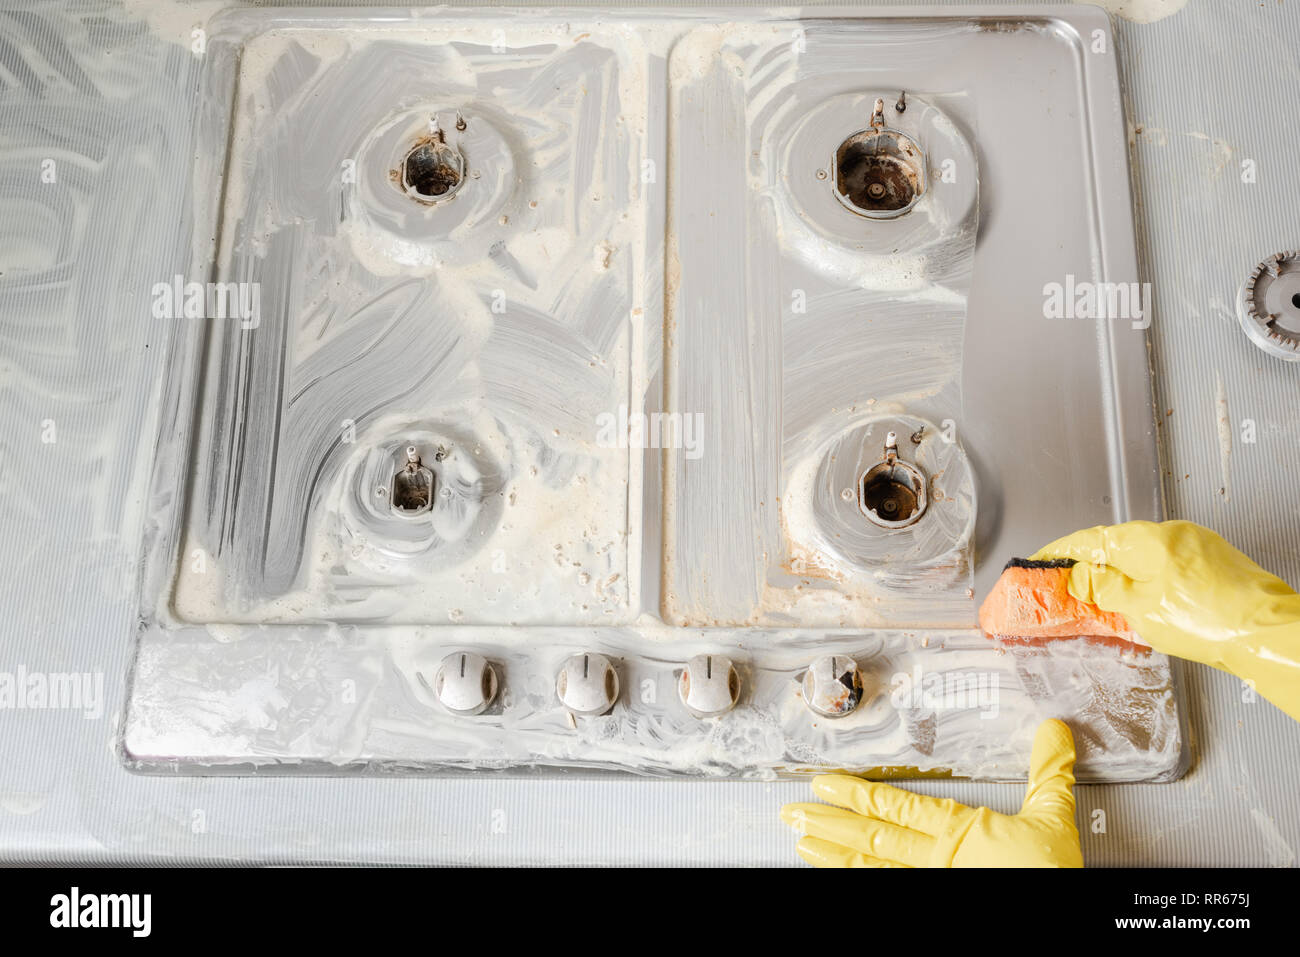 Hands in yellow rubber gloves wash with soap kitchen cooking equipment. Top view. Stock Photo